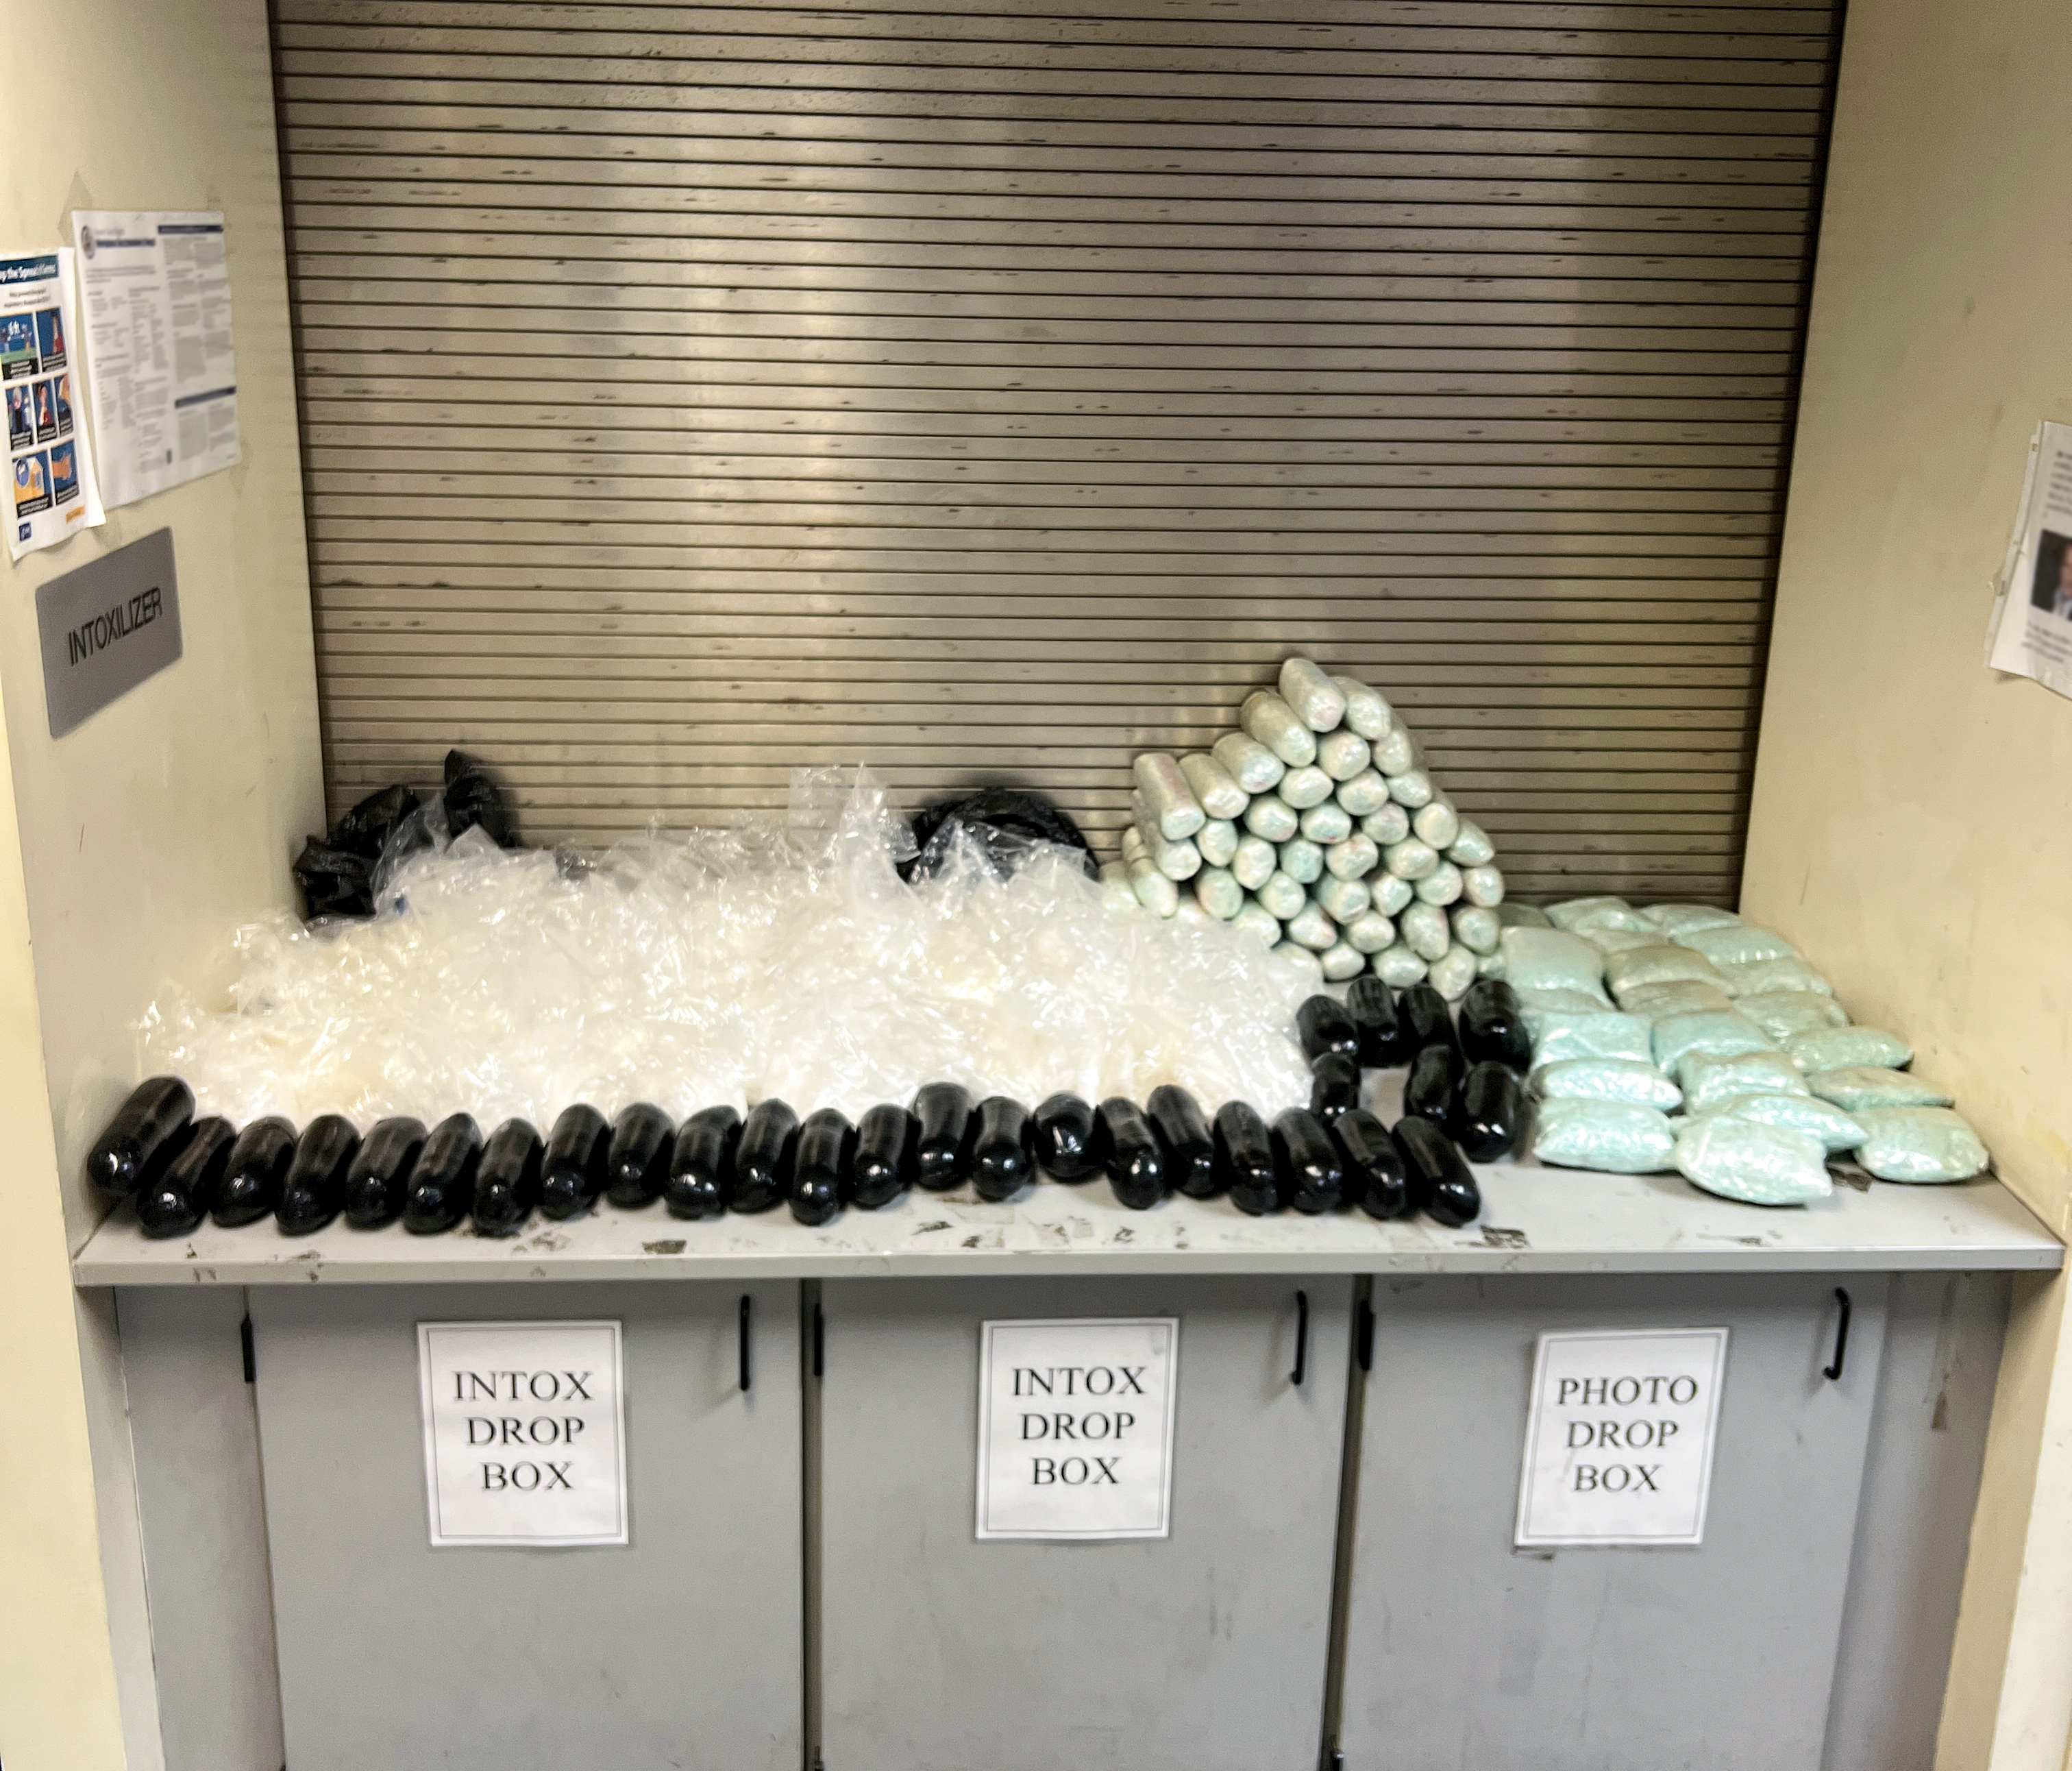 All of the seized drugs displayed on an evidence counter